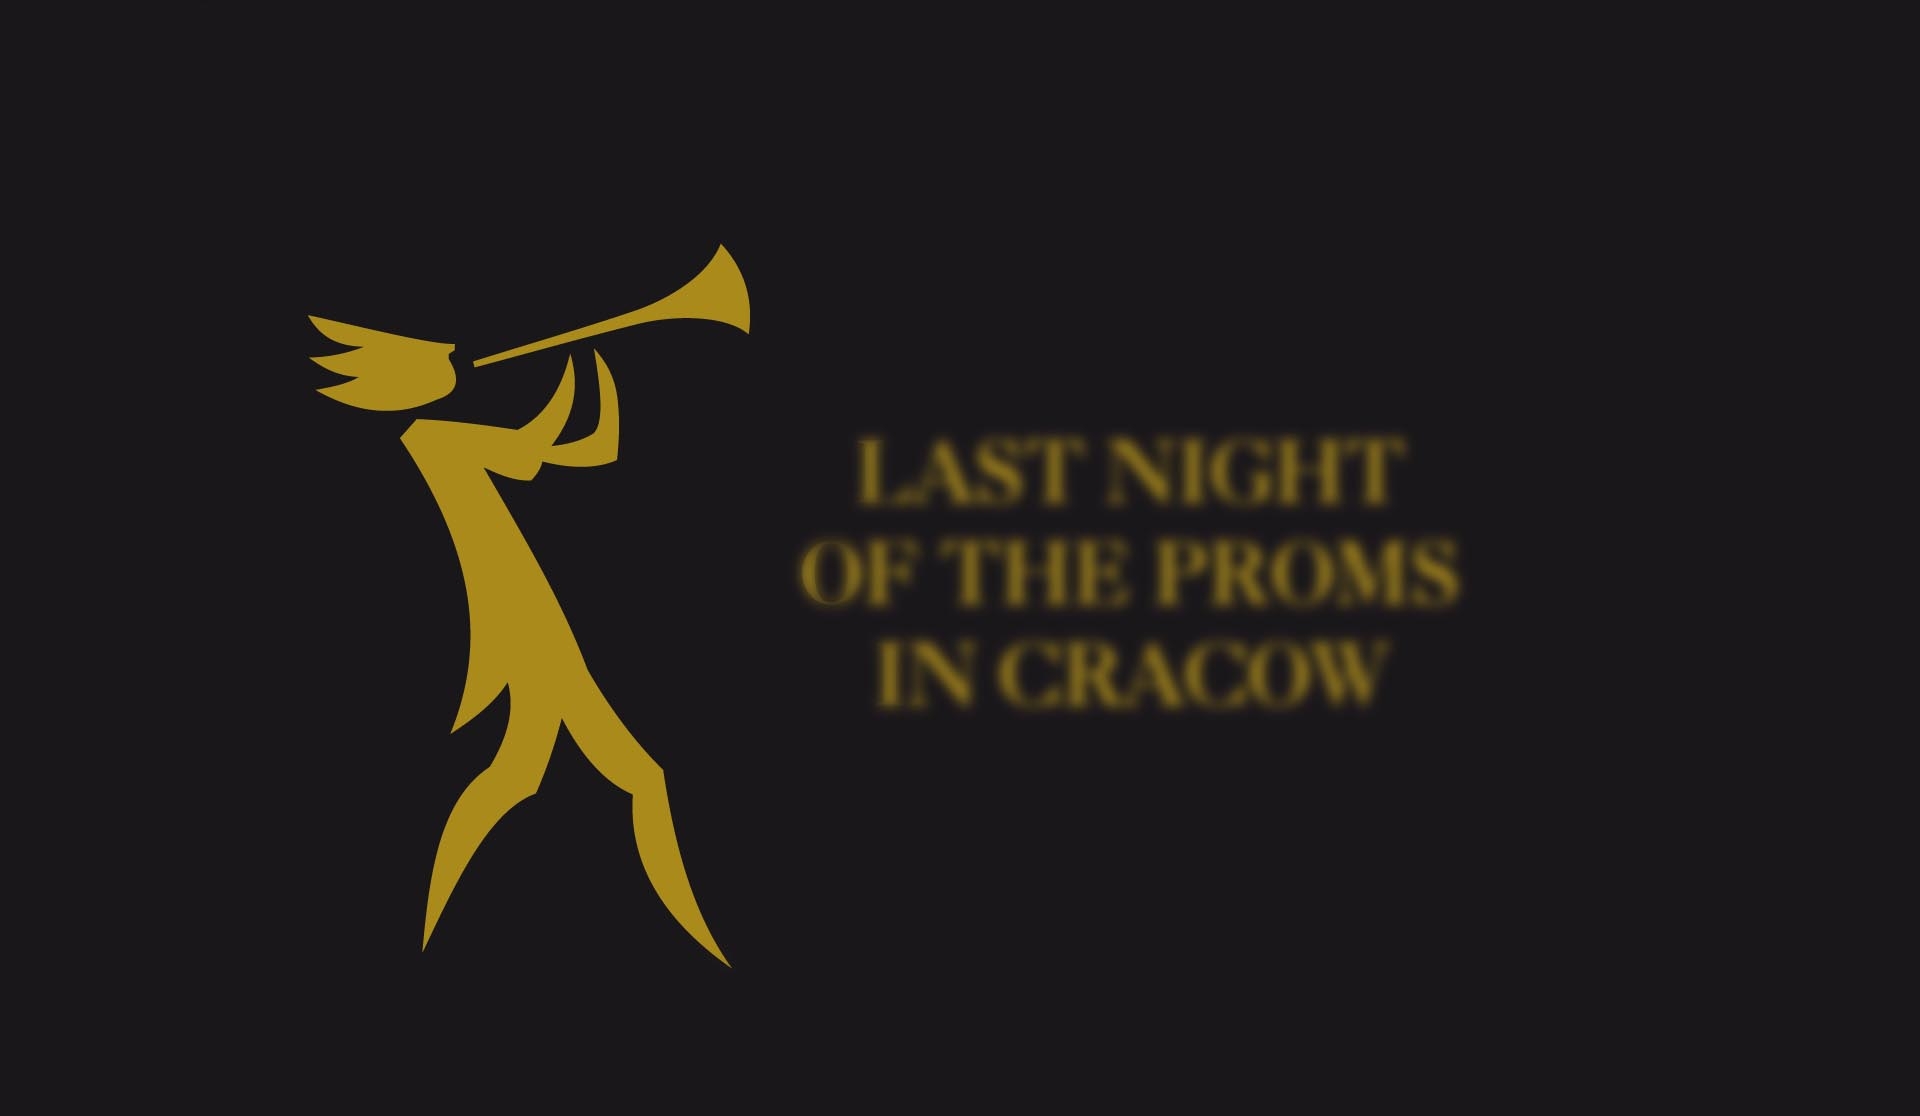 12.09.2015 – XX Jubileuszowy LAST NIGHT OF THE PROMS IN CRACOW